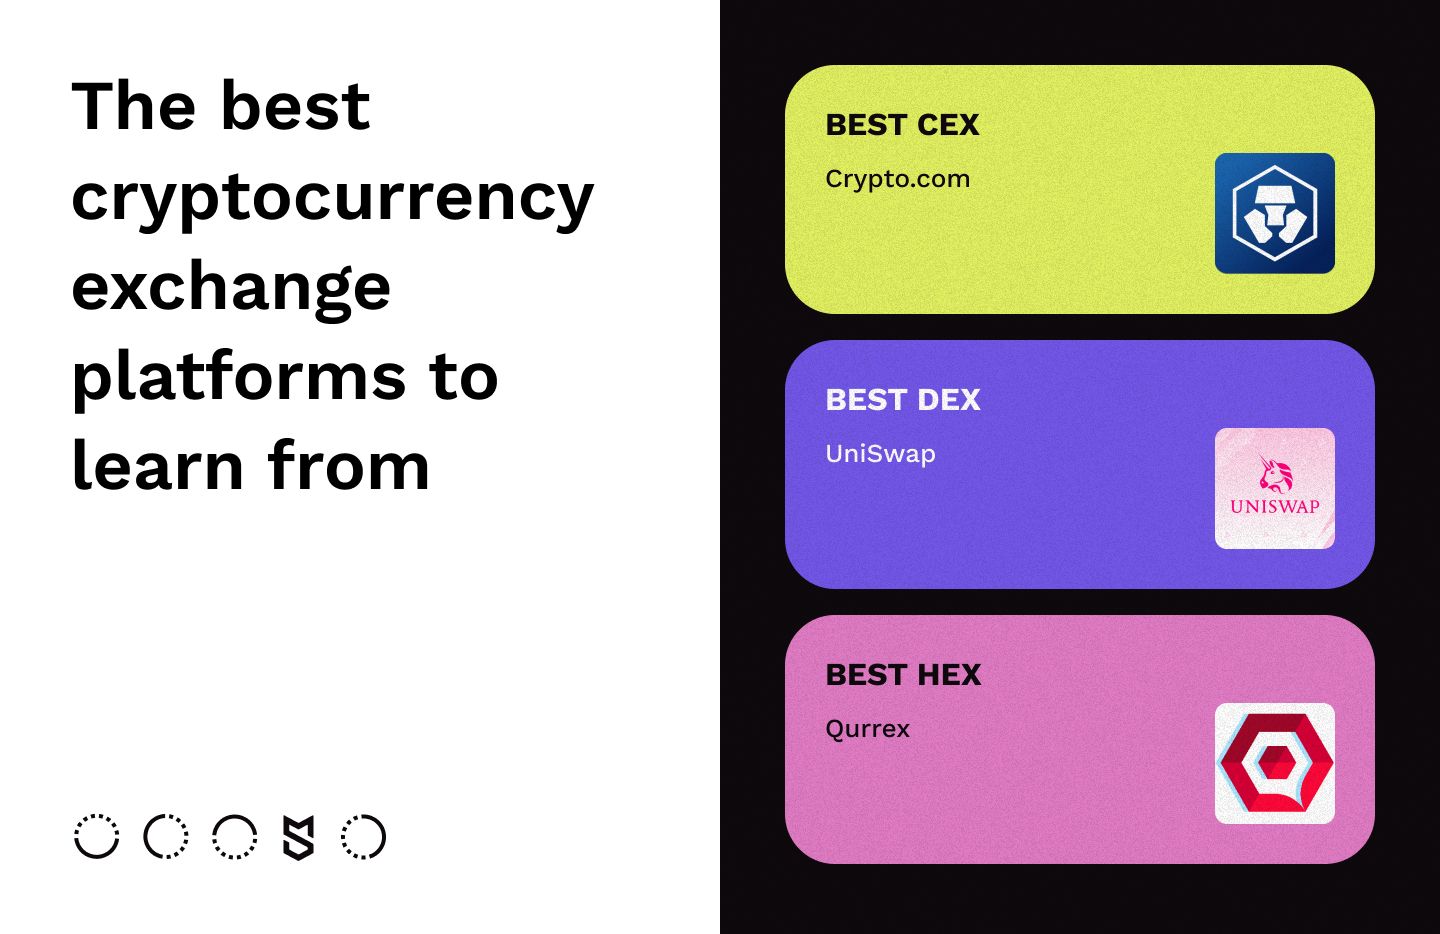 The best cryptocurrency exchange platforms to learn from